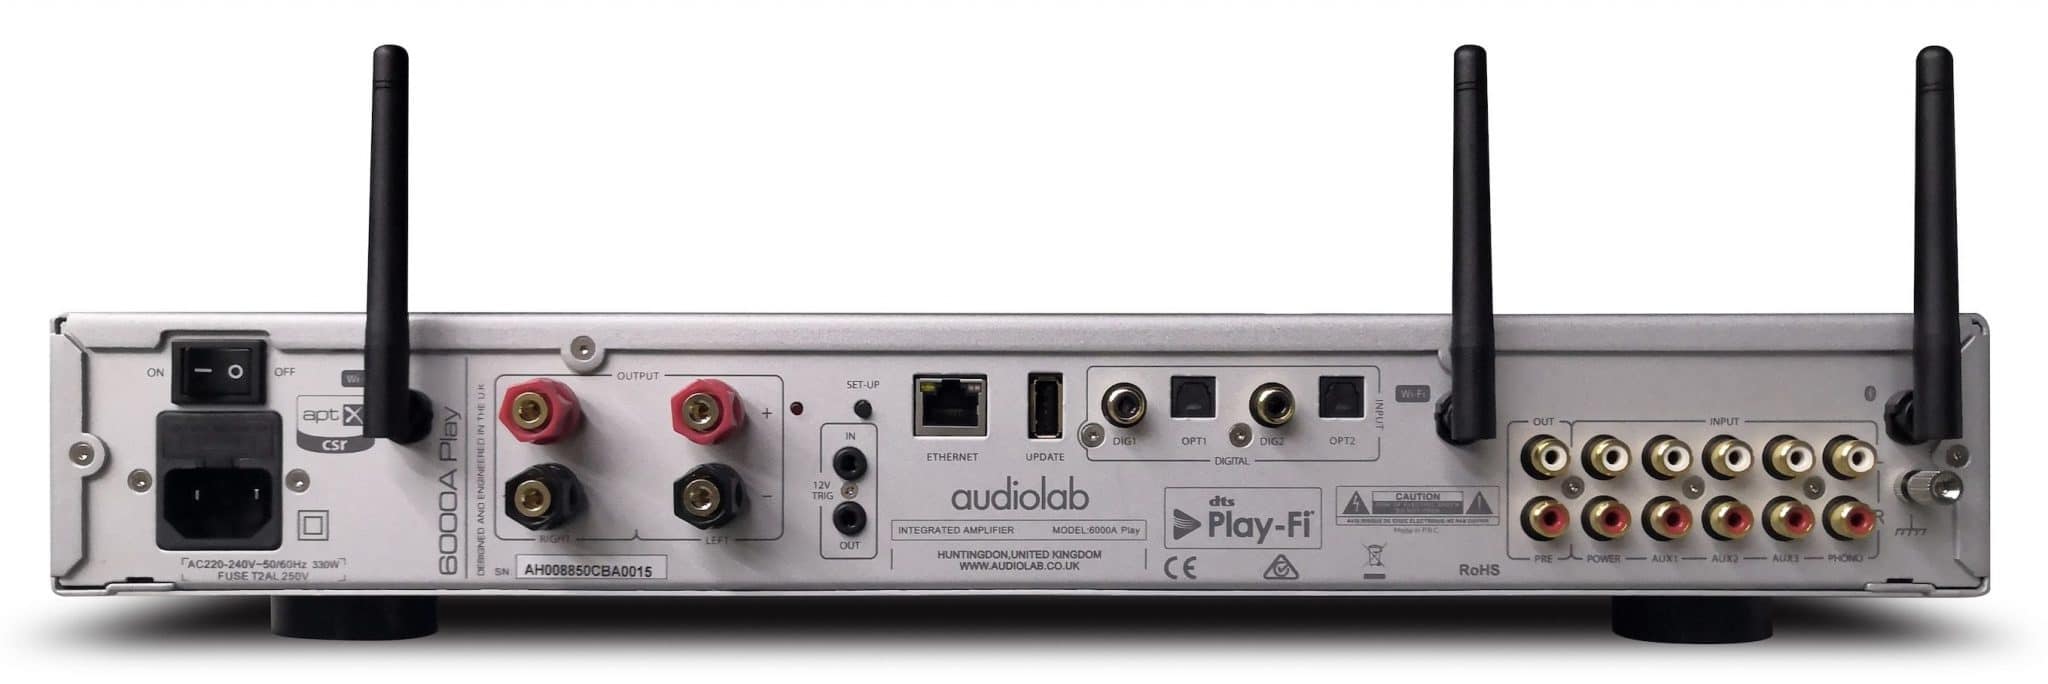 6000A Play streaming amp from Audiolab